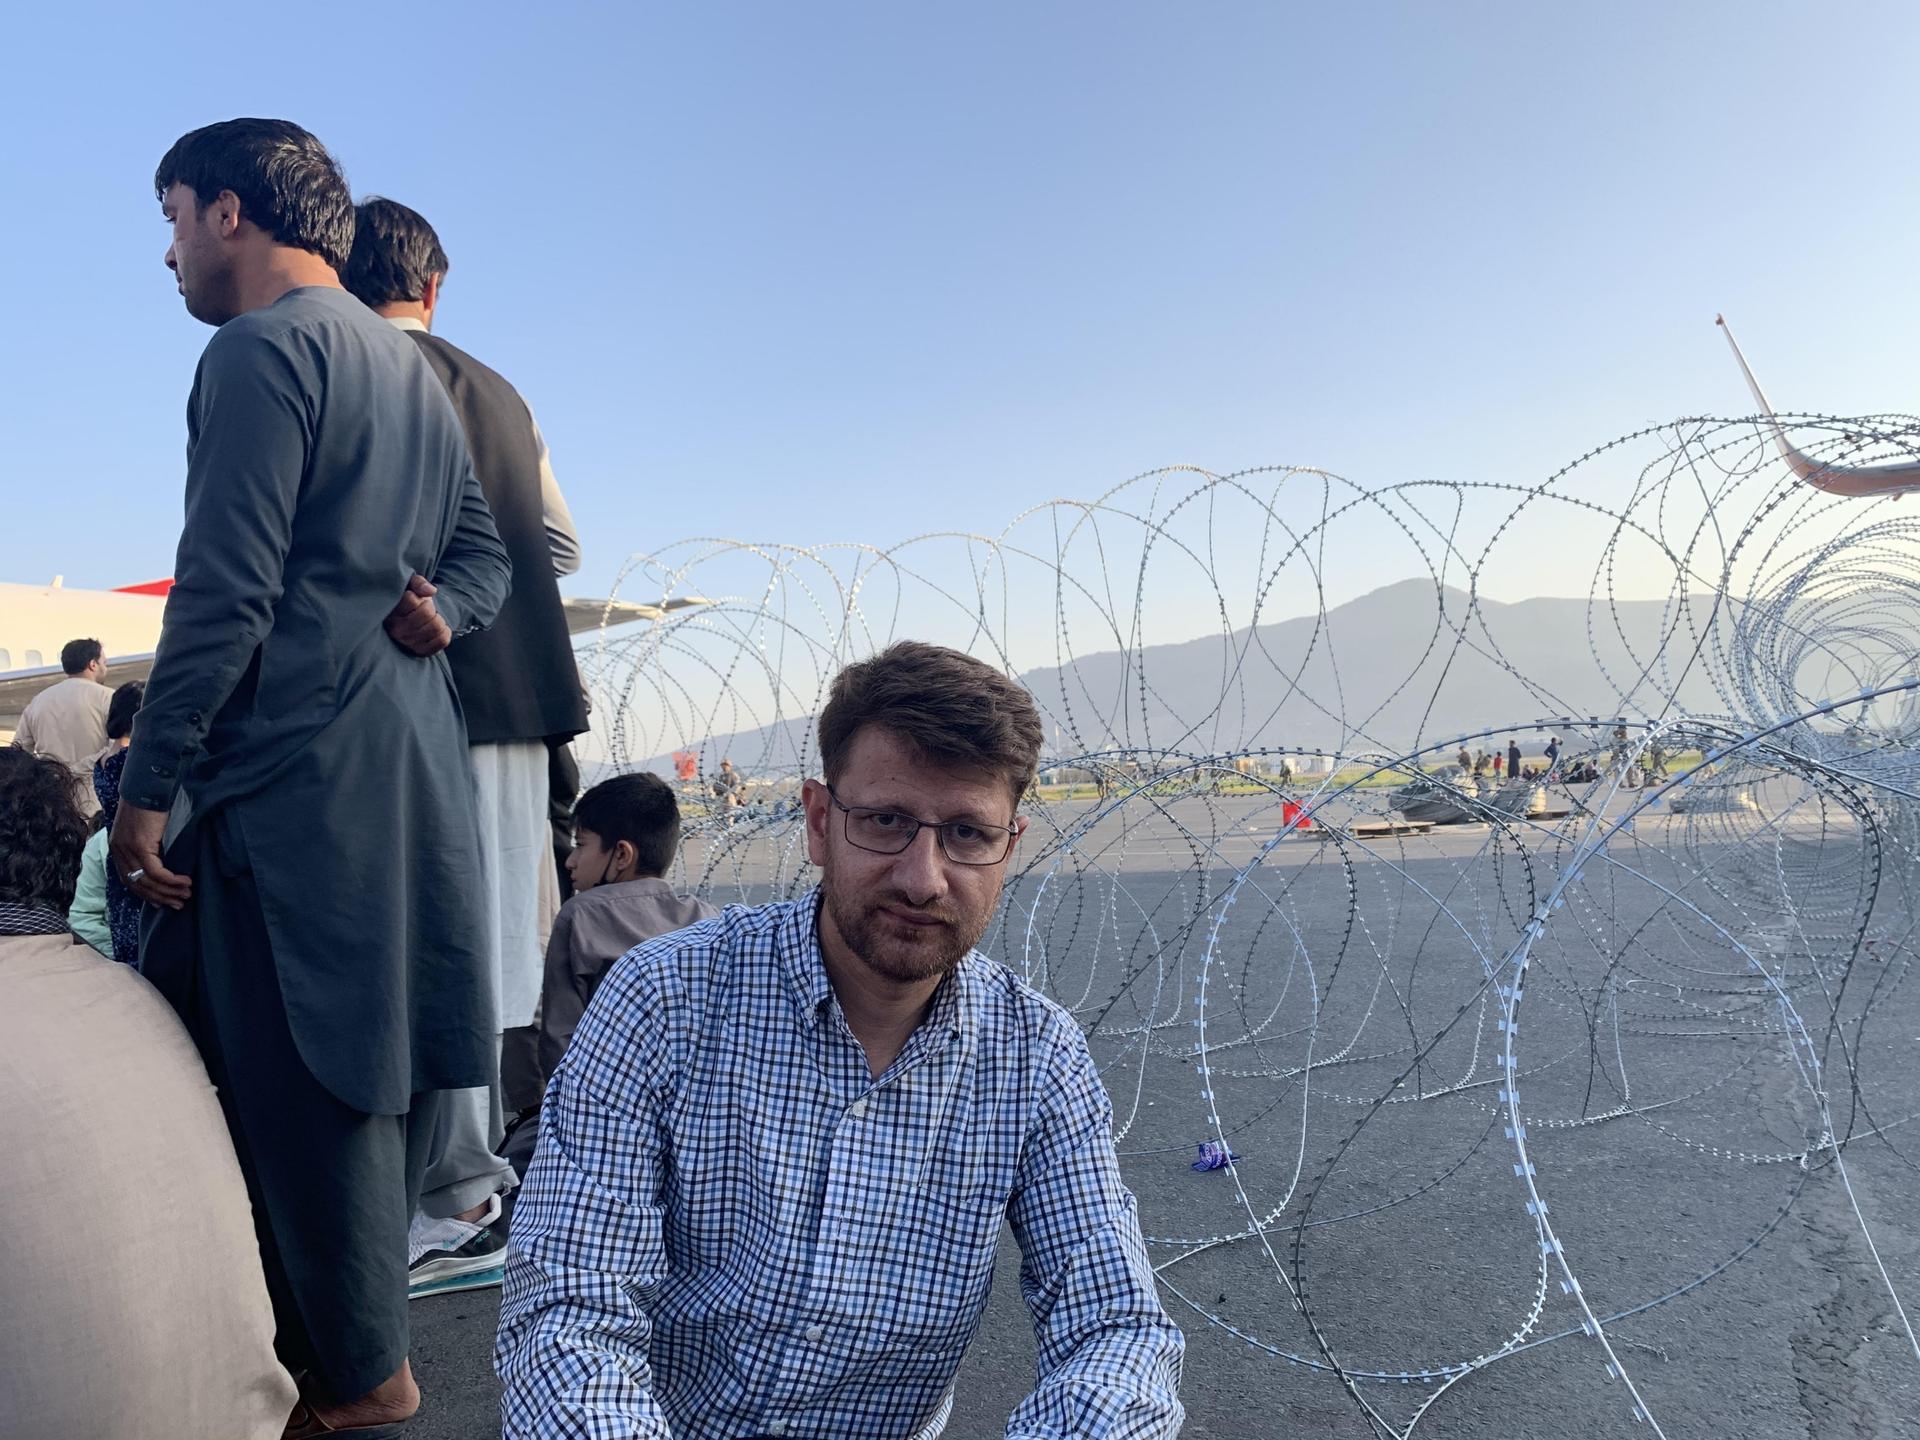 Hanif Sufizada kneeling besides a coil of barbed wire on the airport tarmac, amid a crowd of civilians